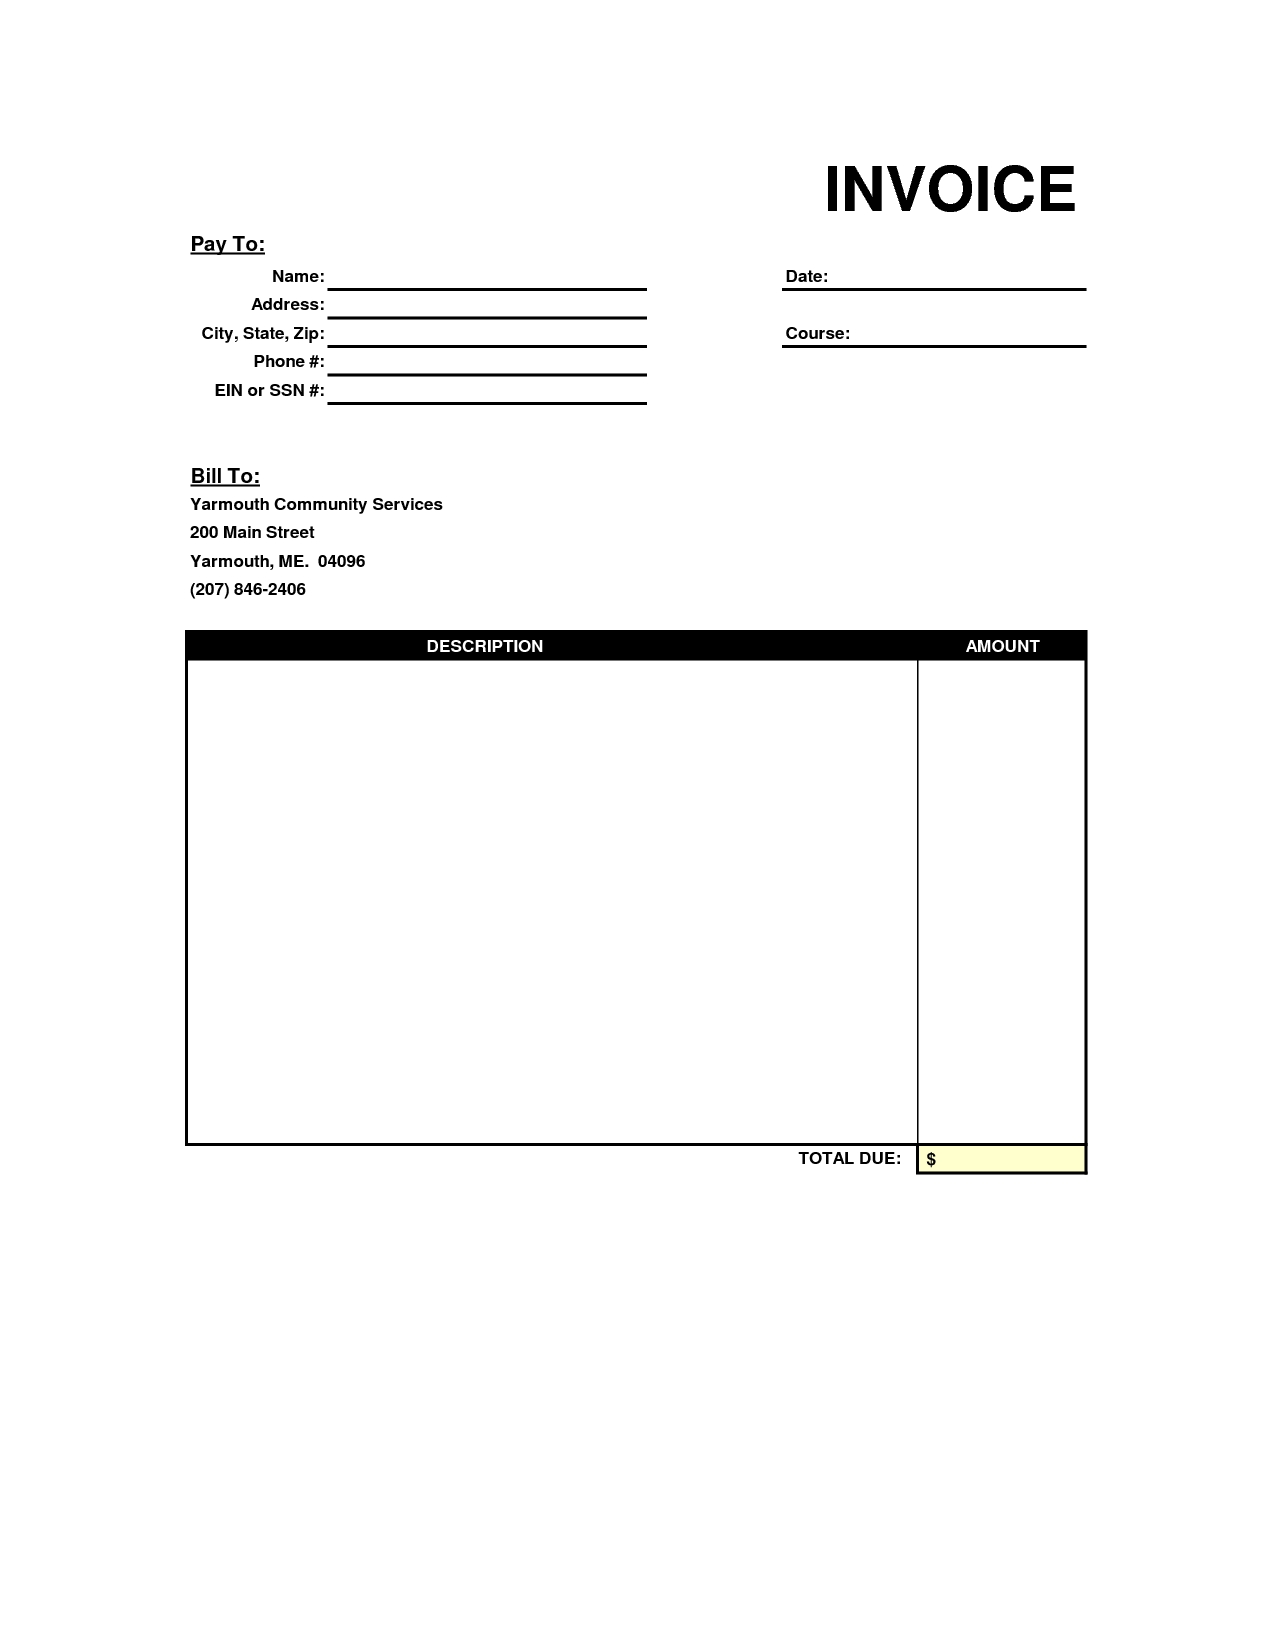 blank invoice template blank invoice blank invoice template free